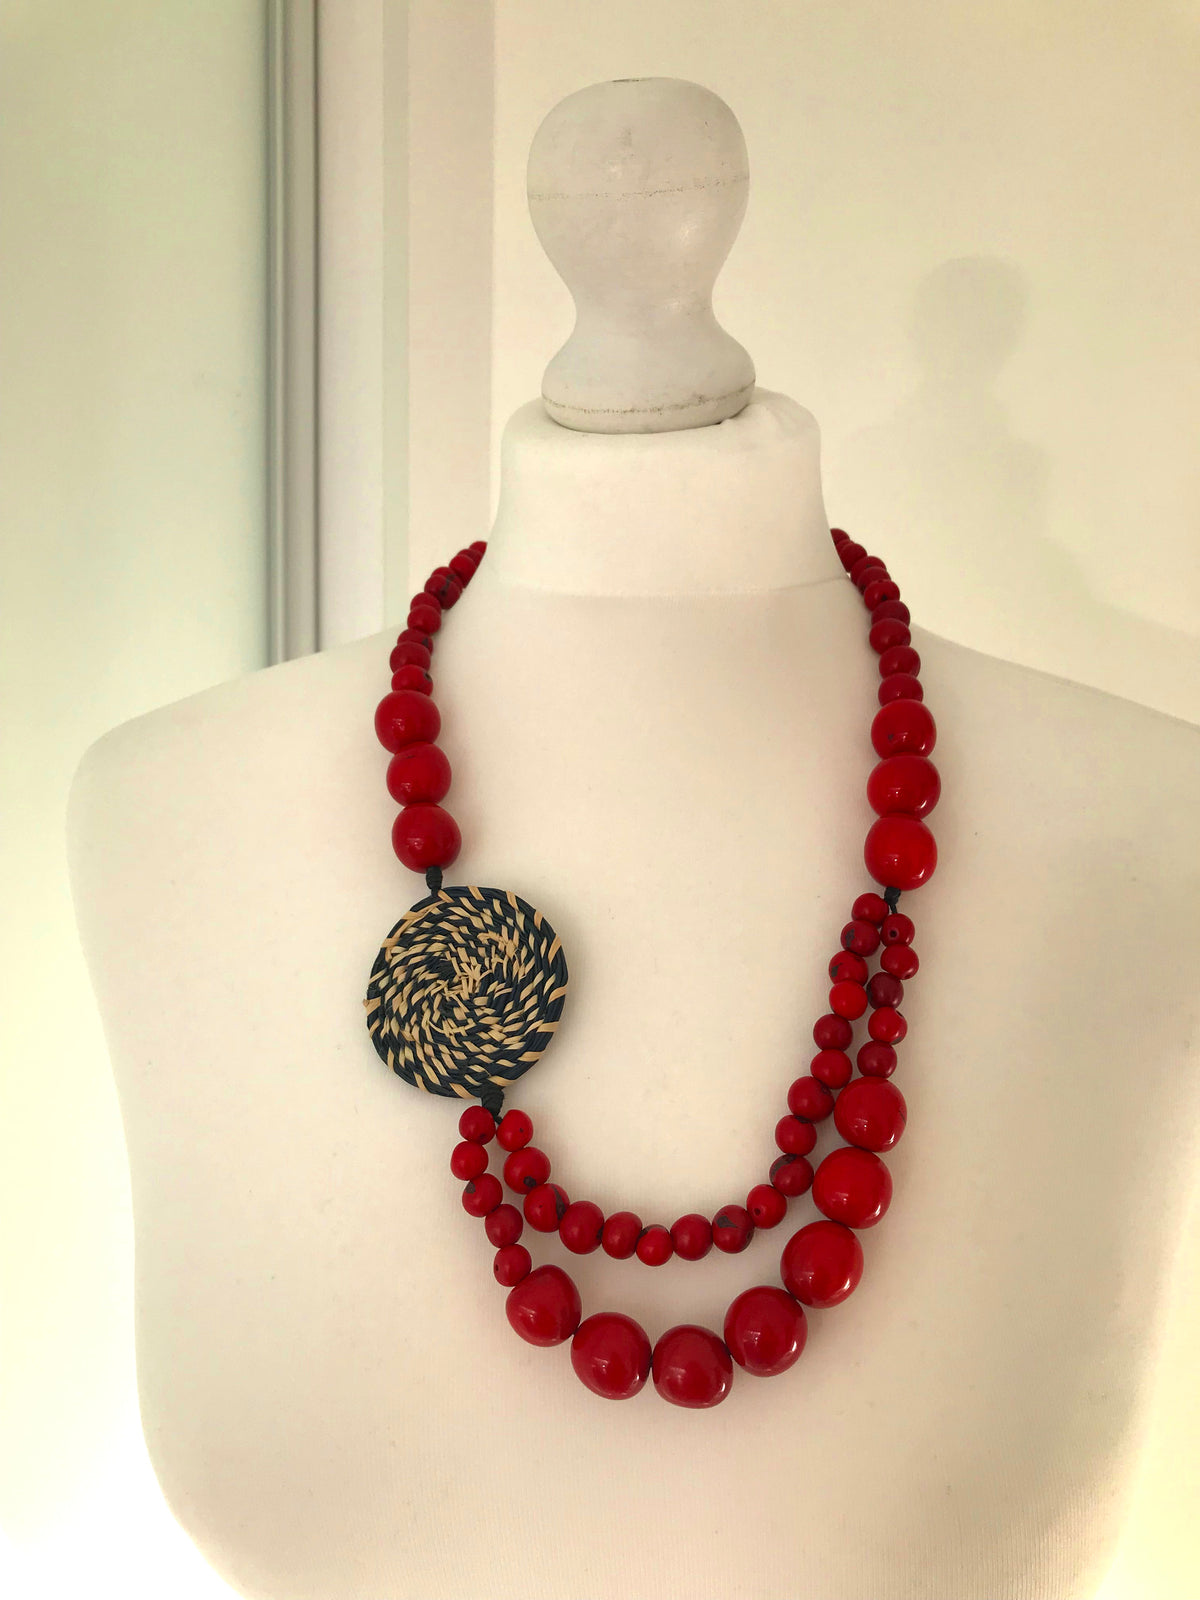 Trilogy necklace - Red